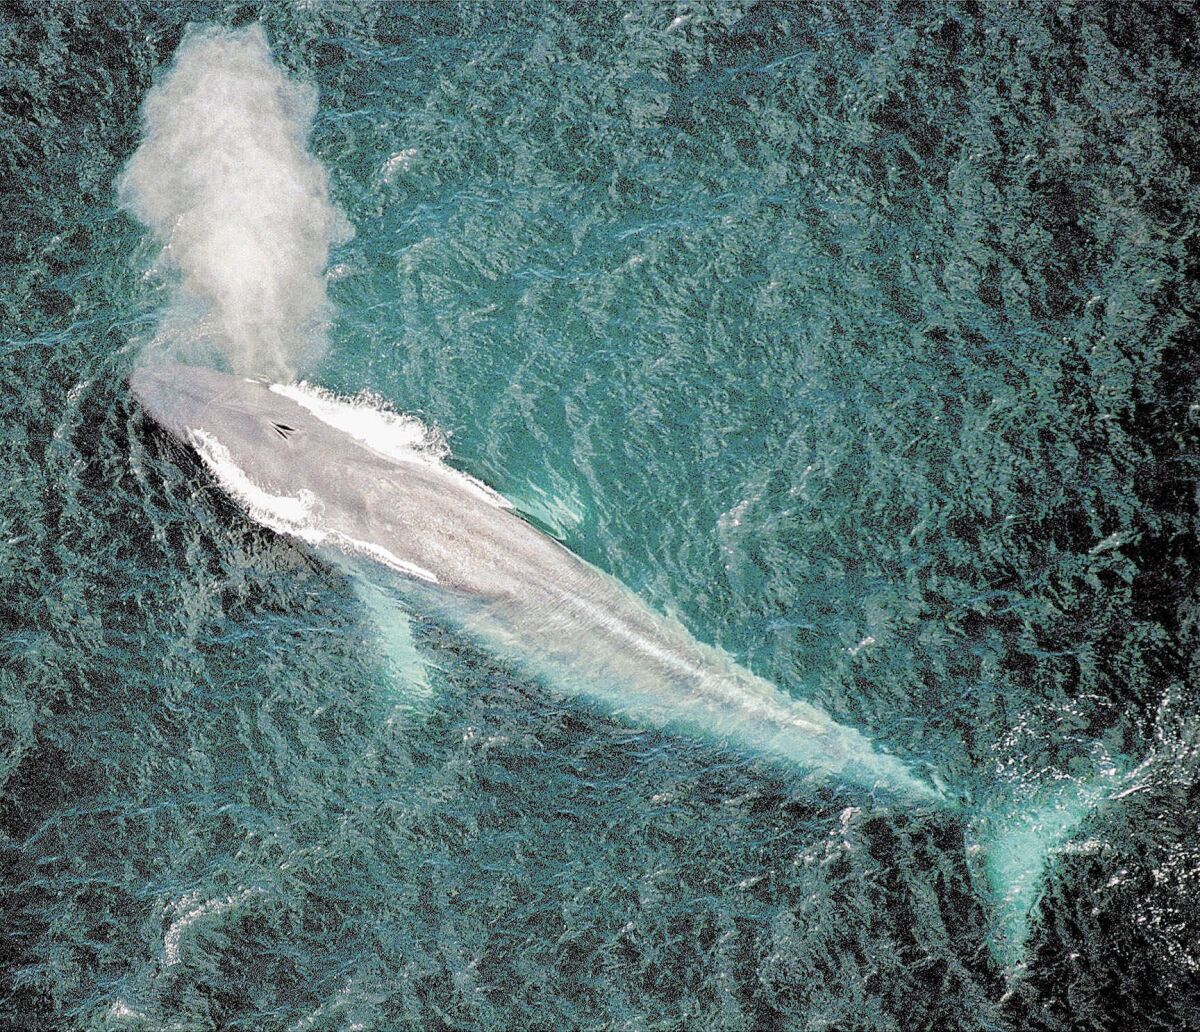 An 80 foot long blue whale swims in the Santa Barbara Channel off the coast of southern California